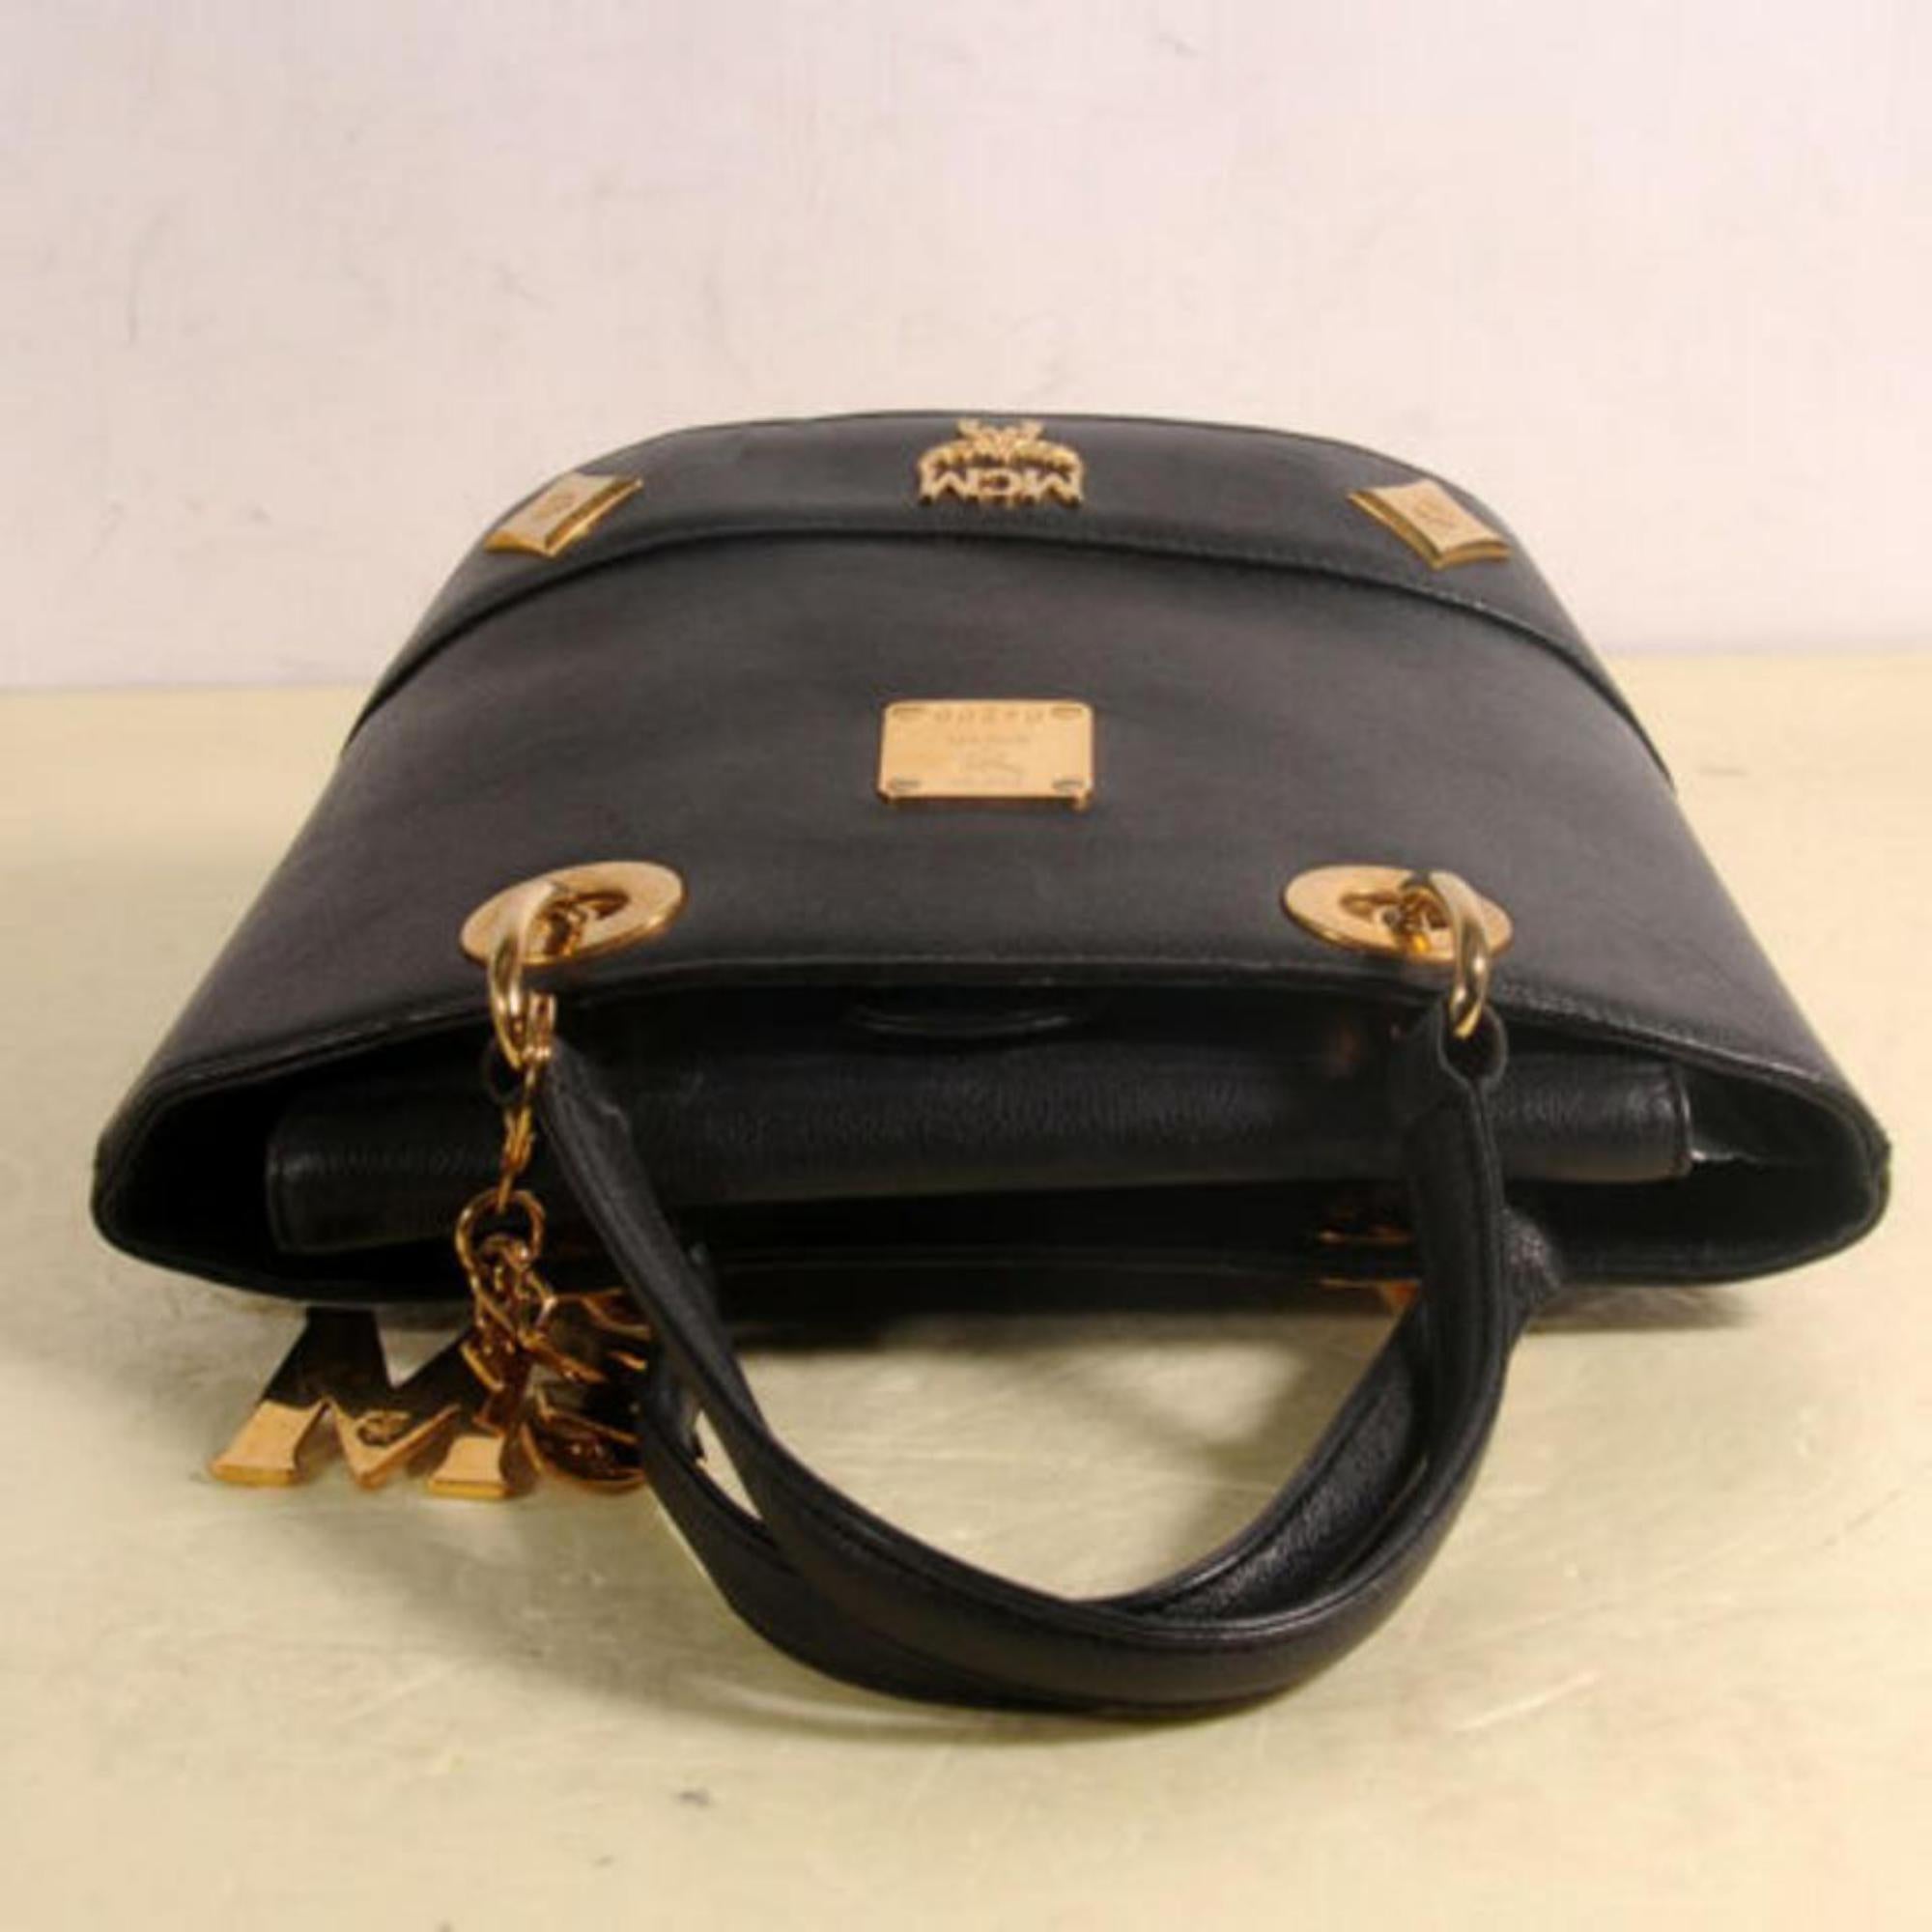 
VERY GOOD VINTAGE CONDITION
(7.5/10 or B+)
Includes Dust Bag and Bag Charm
This item does not come with any extra accessories.
Please review photos for more details.
Color appearance may vary depending on your monitor settings.
SKU : 869880 